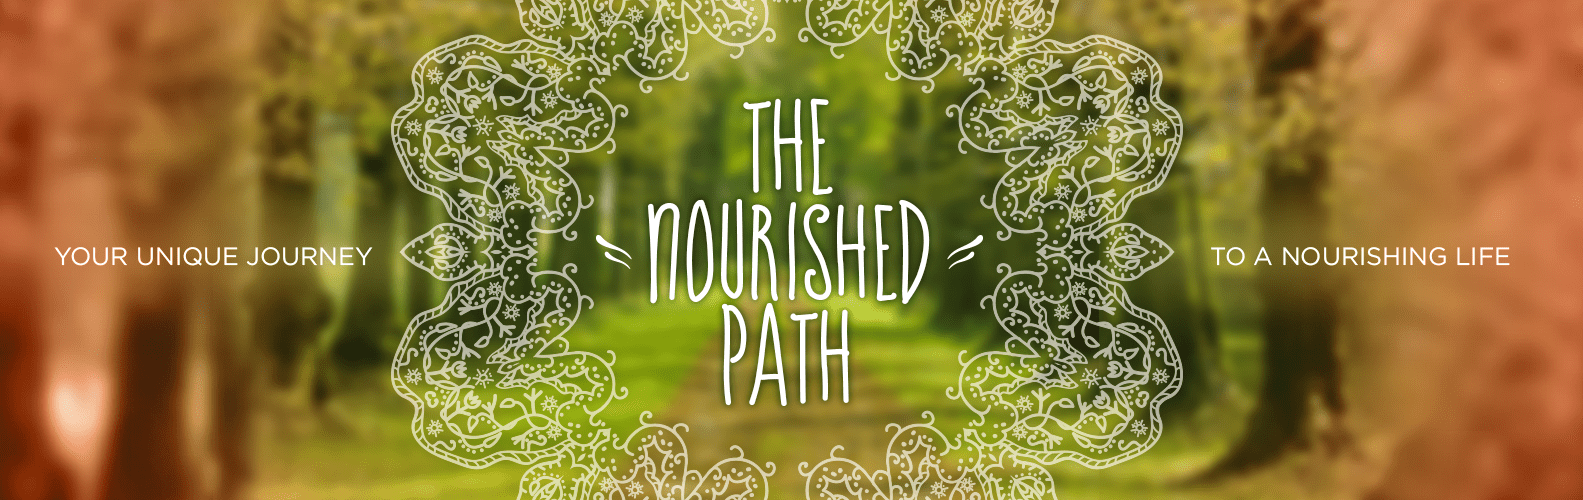 The Nourished Path 1 